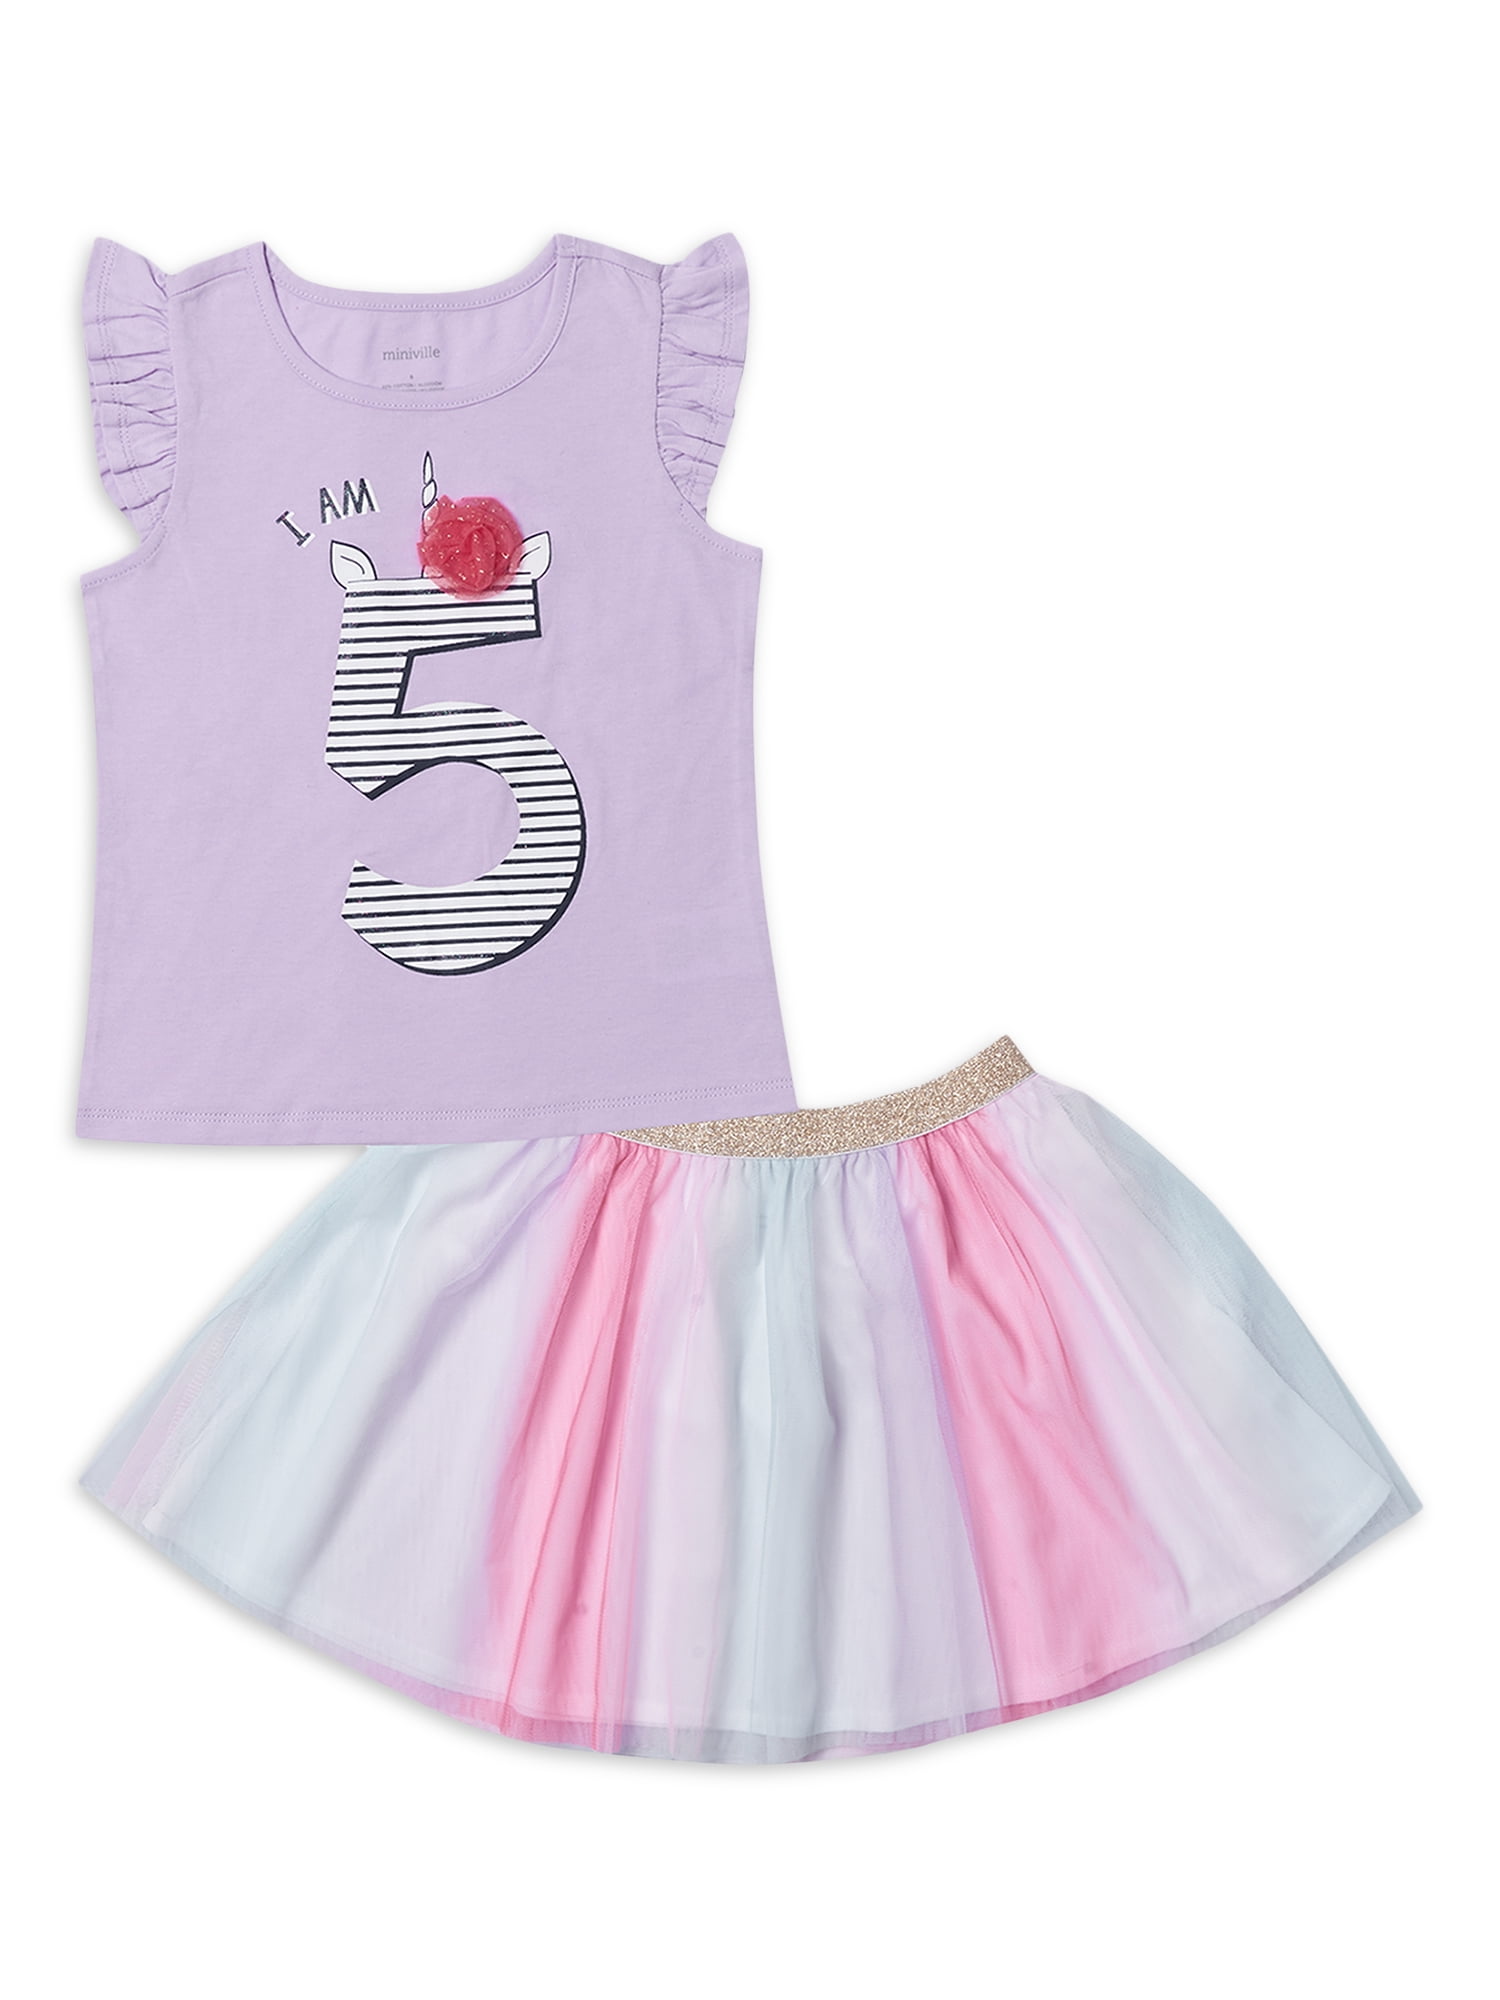 Baby Birthday Kid Girl Clothes Outfit Tutu Skirt Dress+Top T-shirt 2Pc Party Set 